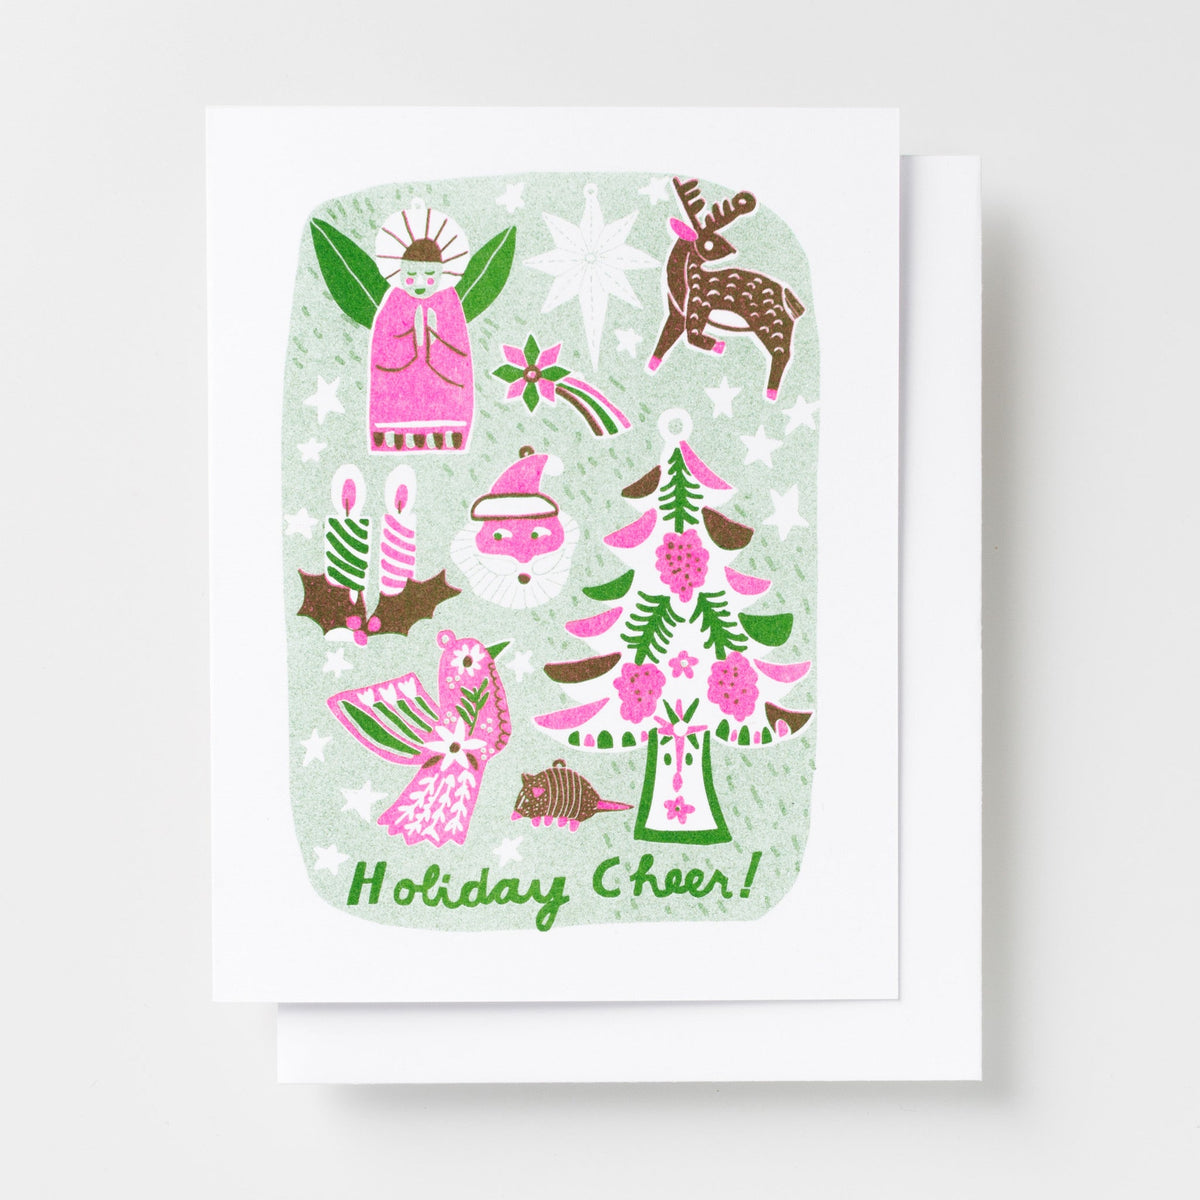 Holiday Cheer - Risograph Card - Yellow Owl Workshop